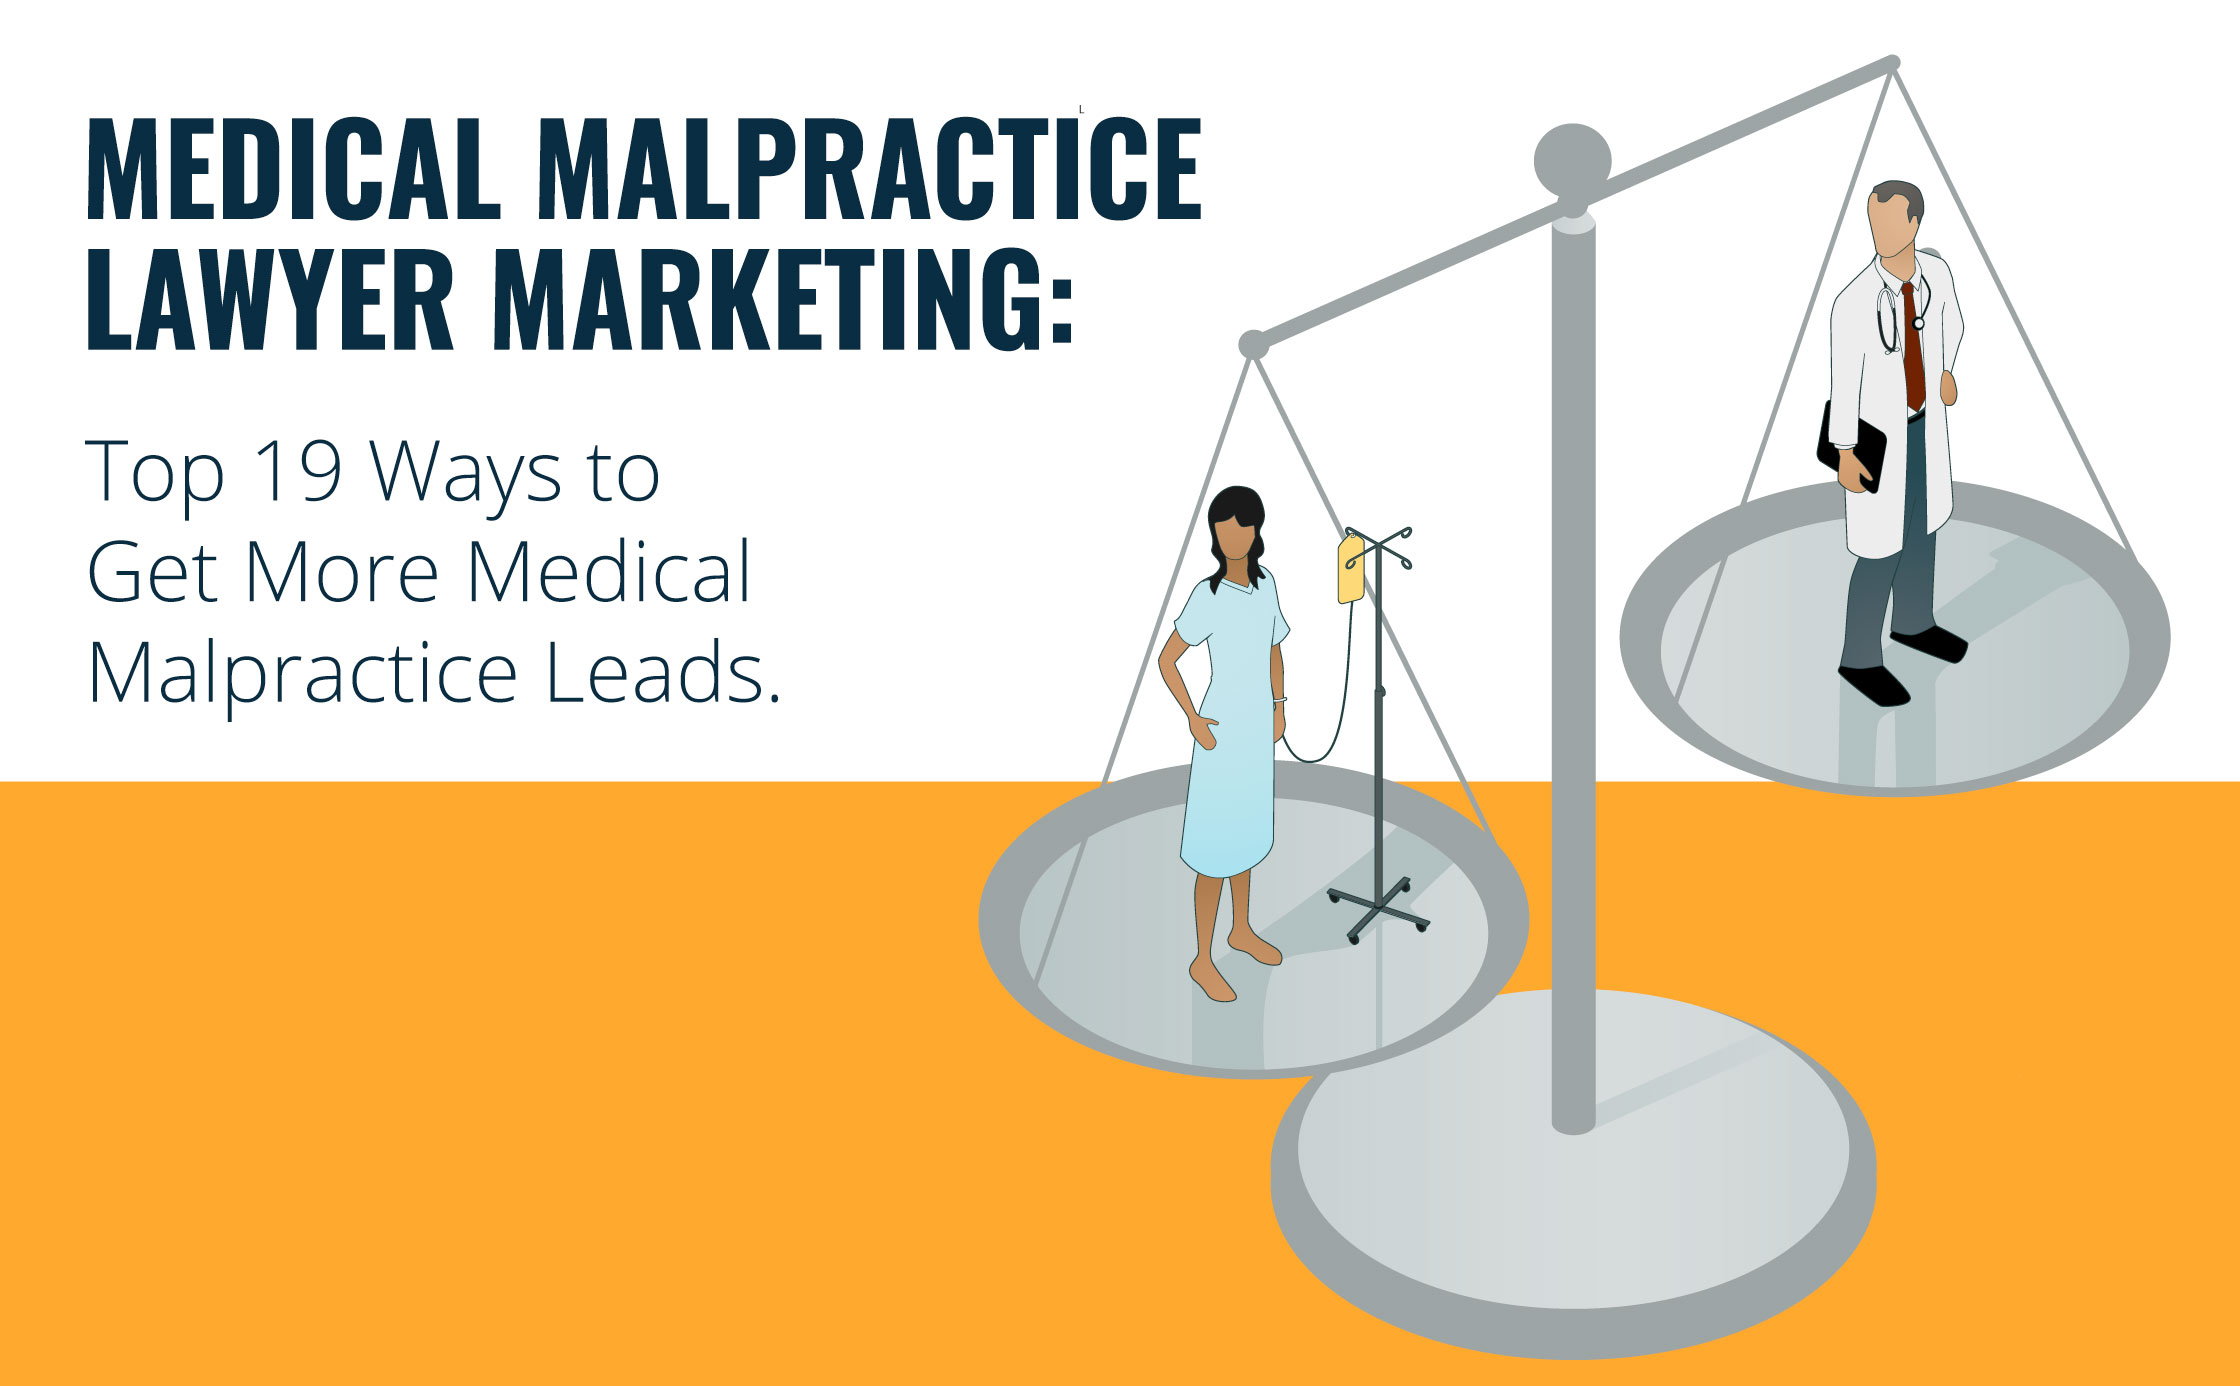 Medical Malpractice Lawyer Marketing: Top 19 Ways to Get More Medical Malpractice Leads